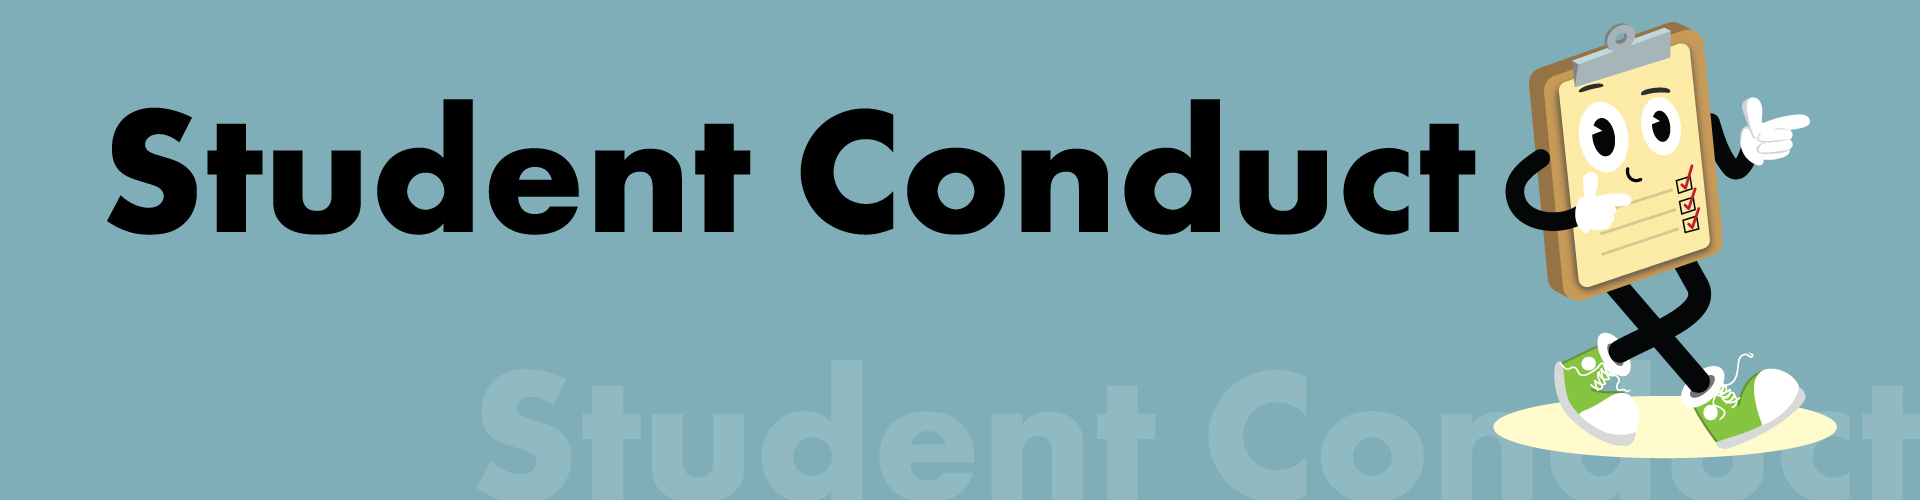 Student Conduct banner